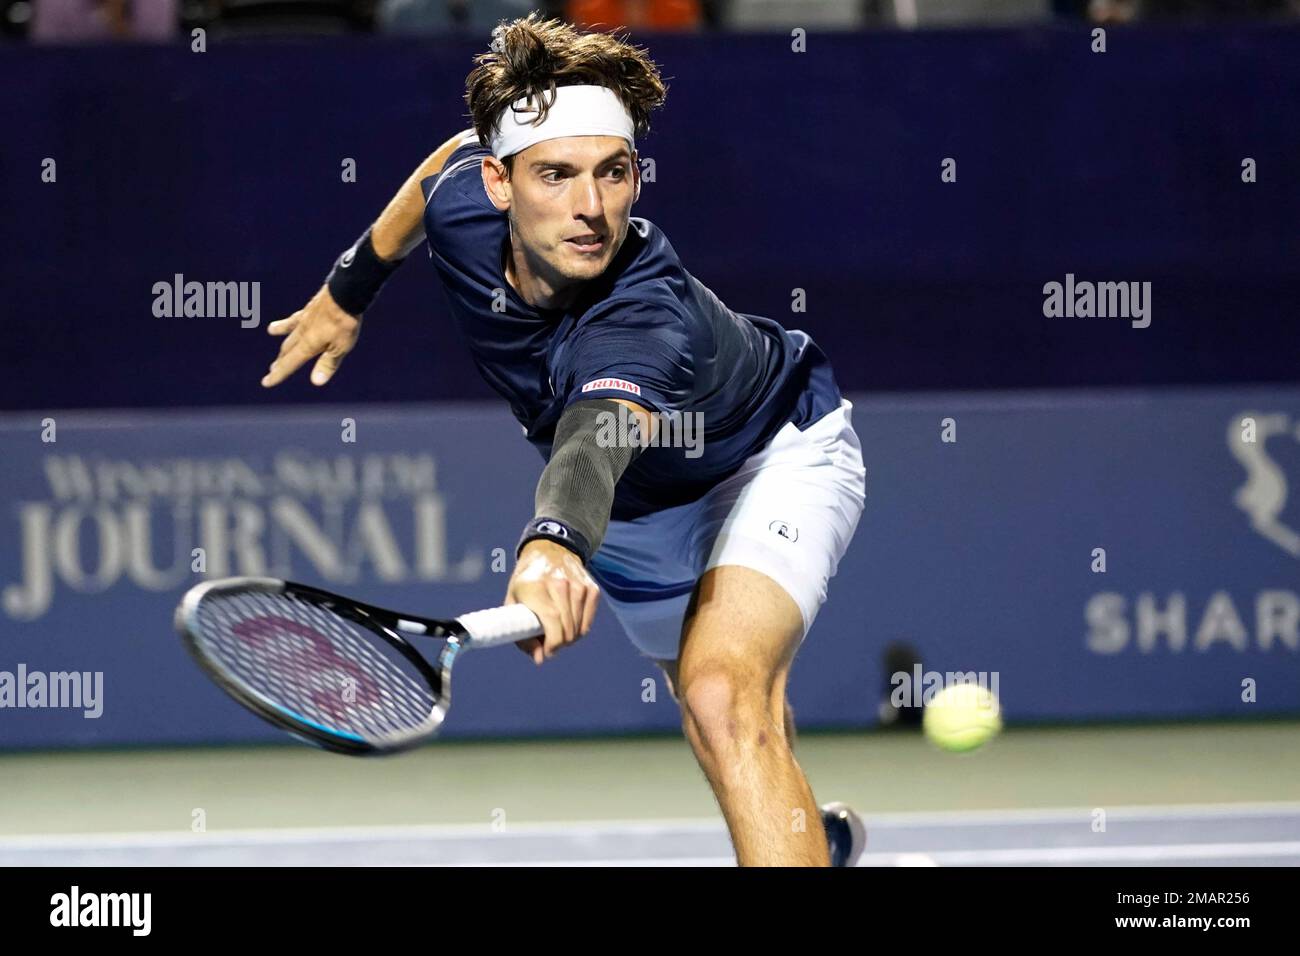 Marc-Andrea Huesler, of Switzerland, returns a shot against Laslo Djere, of Serbia, during their semifinal match in the Winston-Salem Open tennis tournament in Winston-Salem, N.C., Friday, Aug